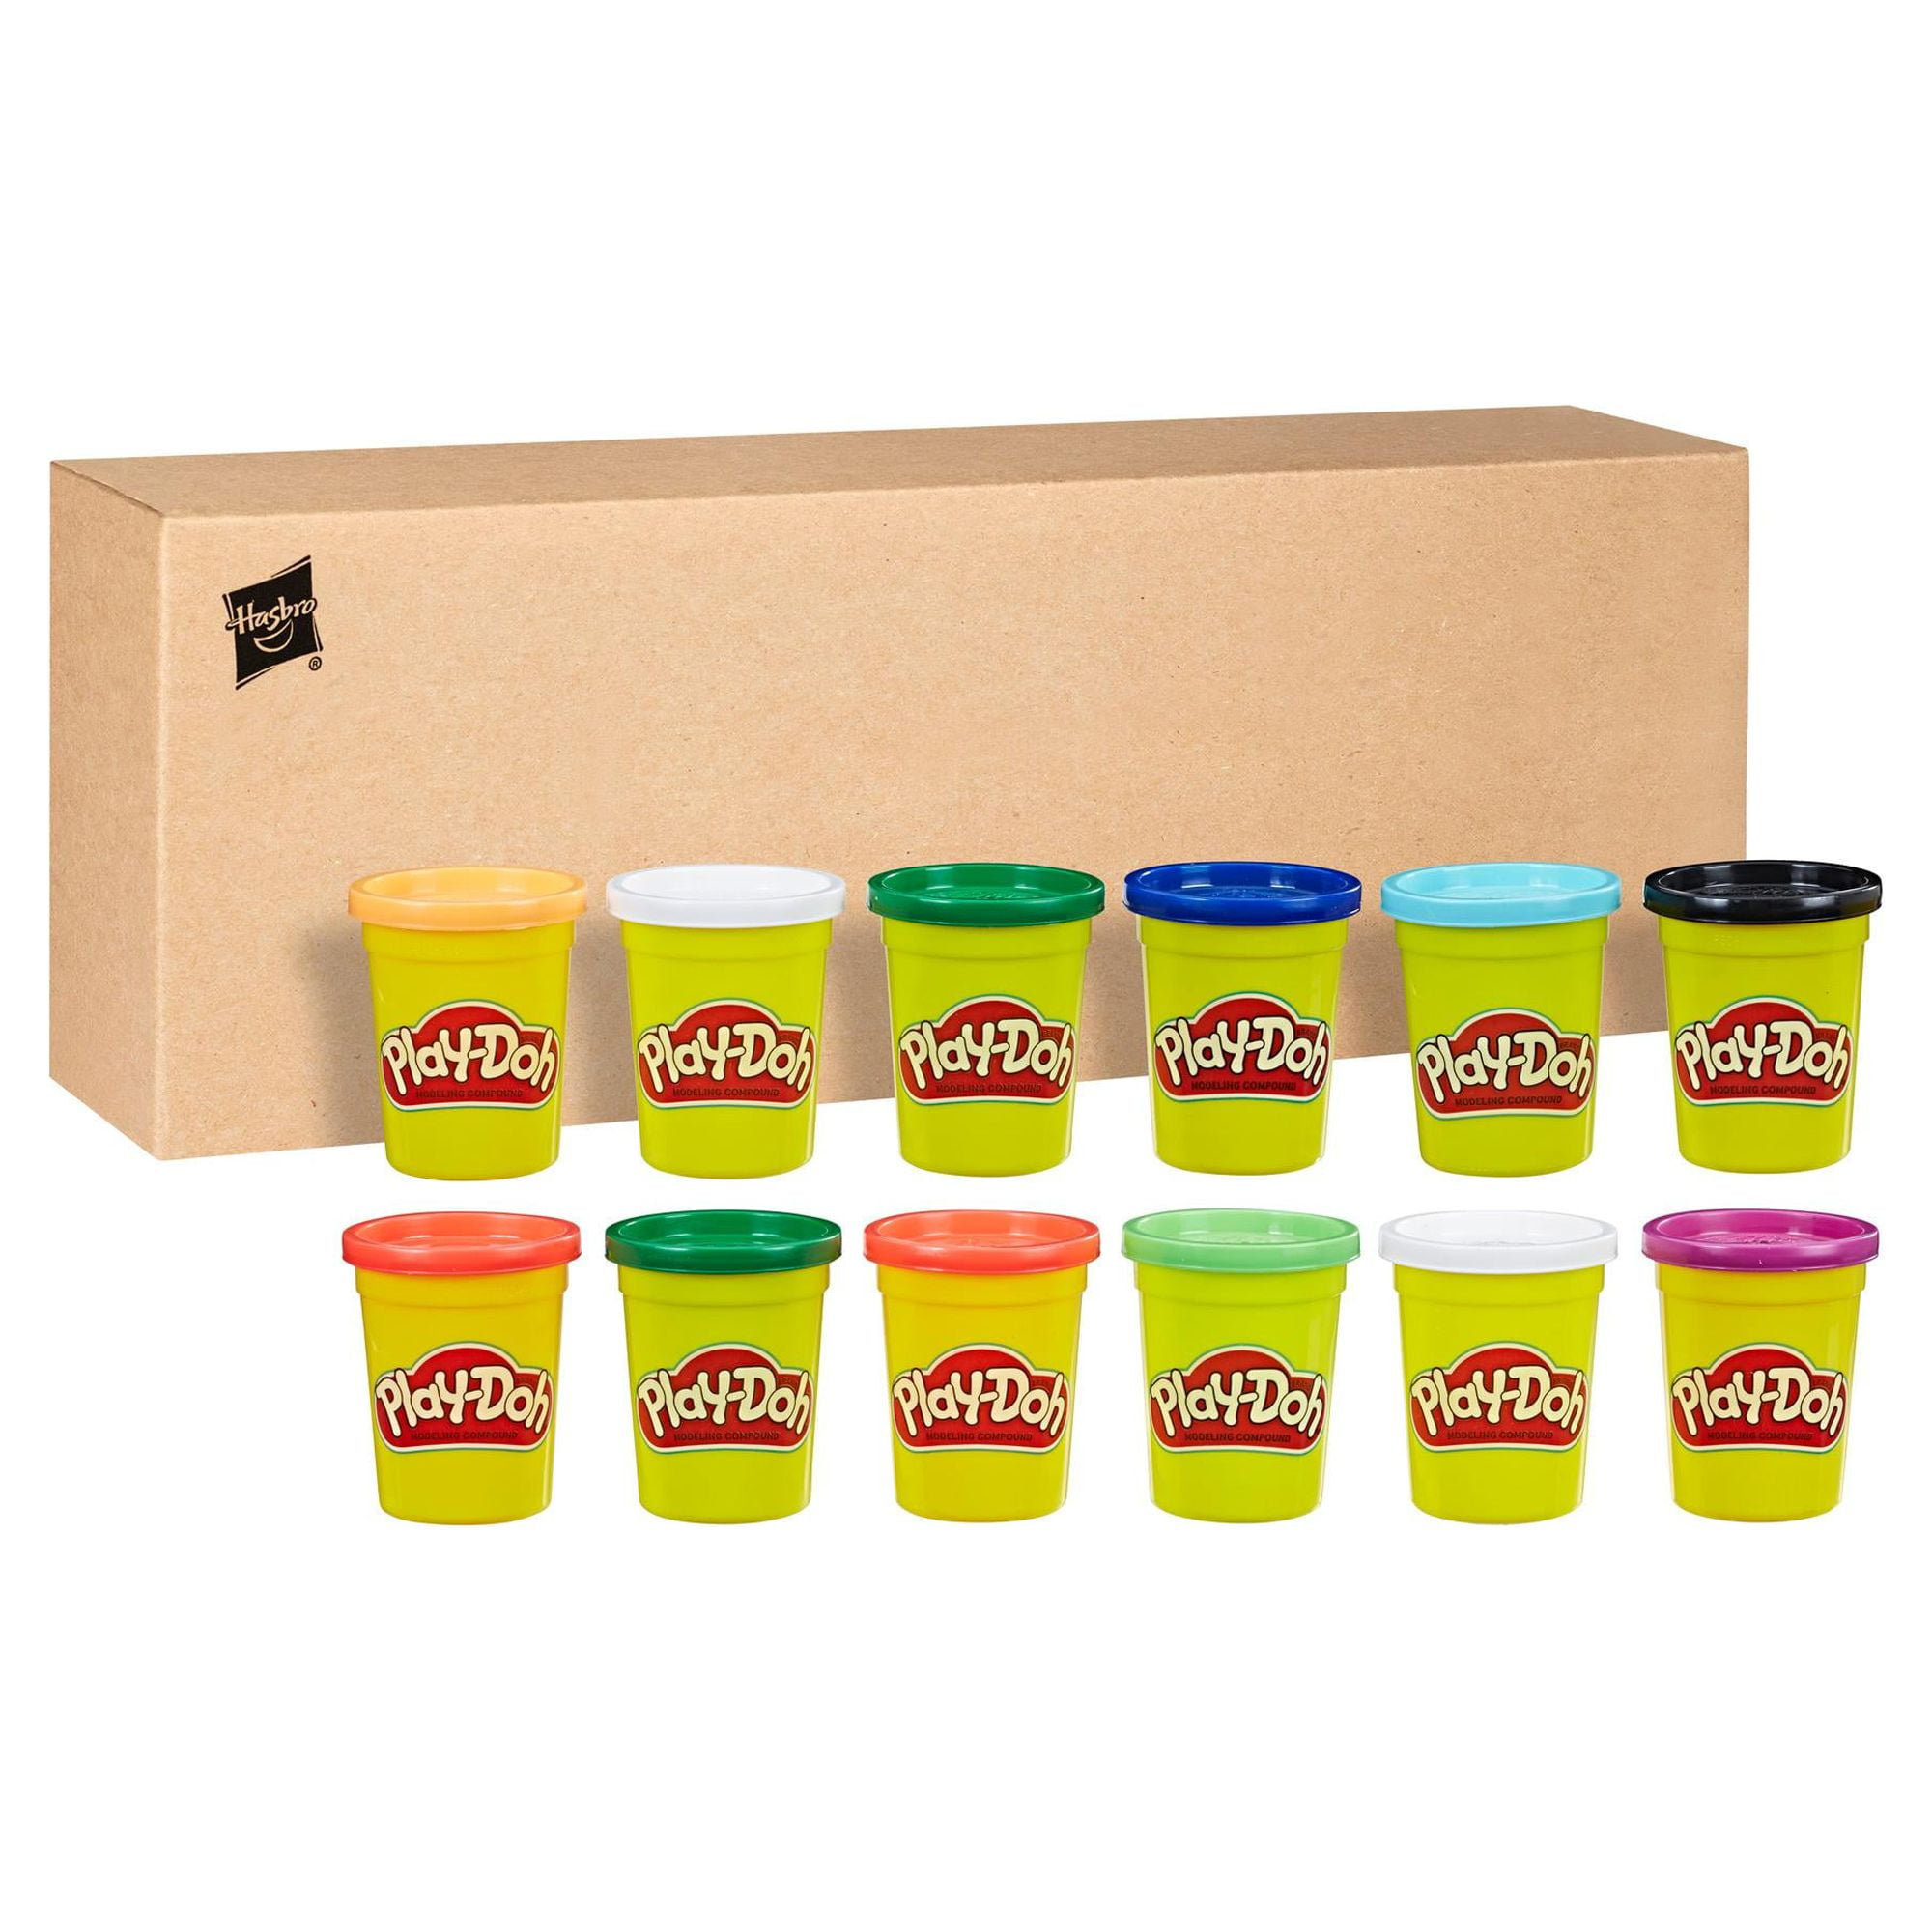  Play-Doh Bulk Pack of 48 Cans, 6 Sets of 8 Modeling